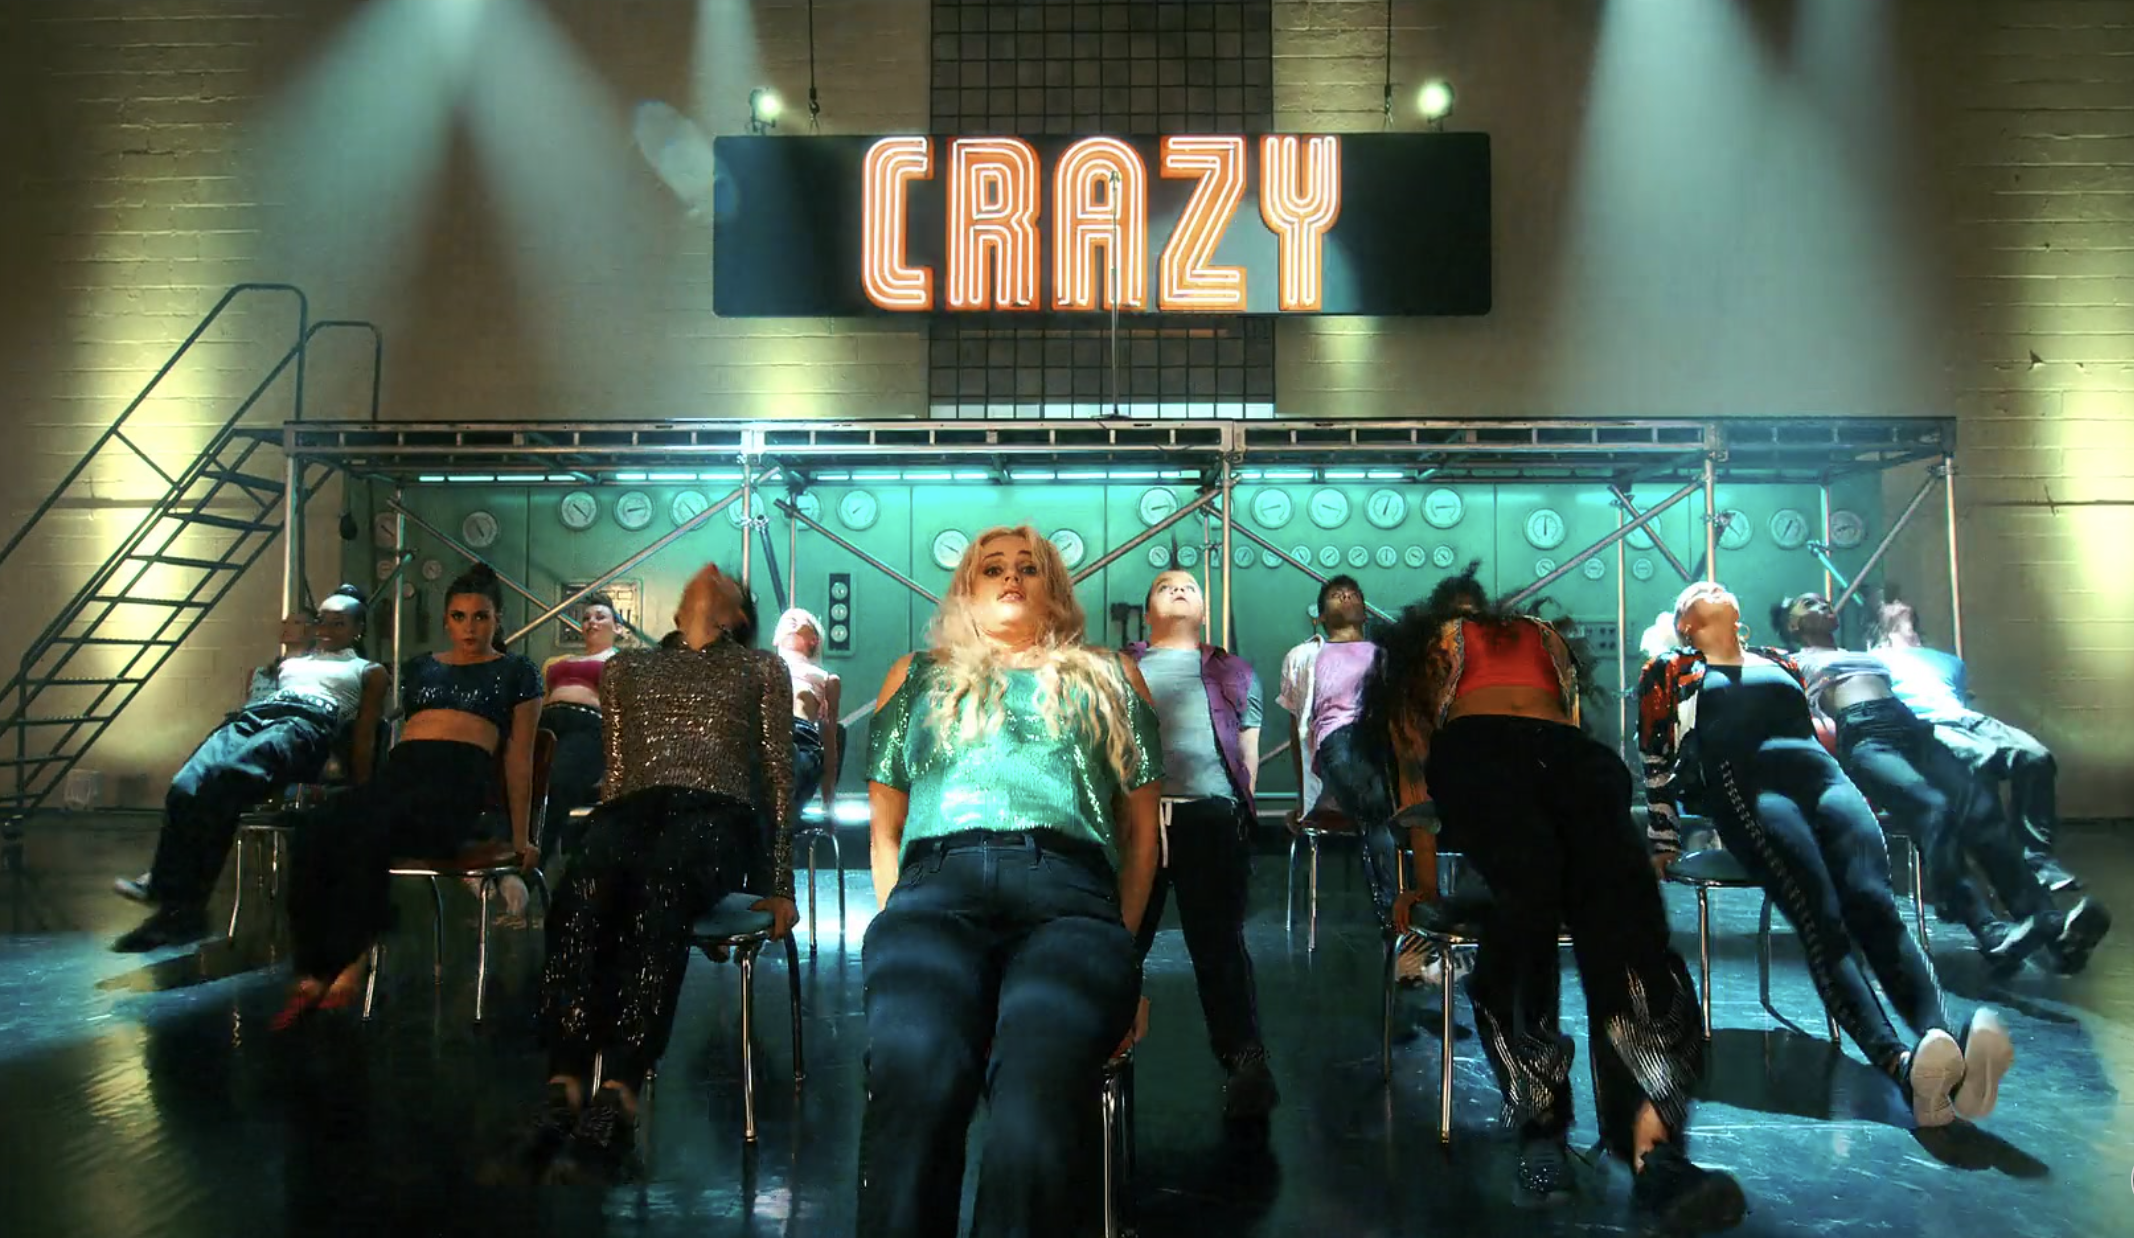 People leaning back in their chairs with a &quot;Crazy&quot; sign above them